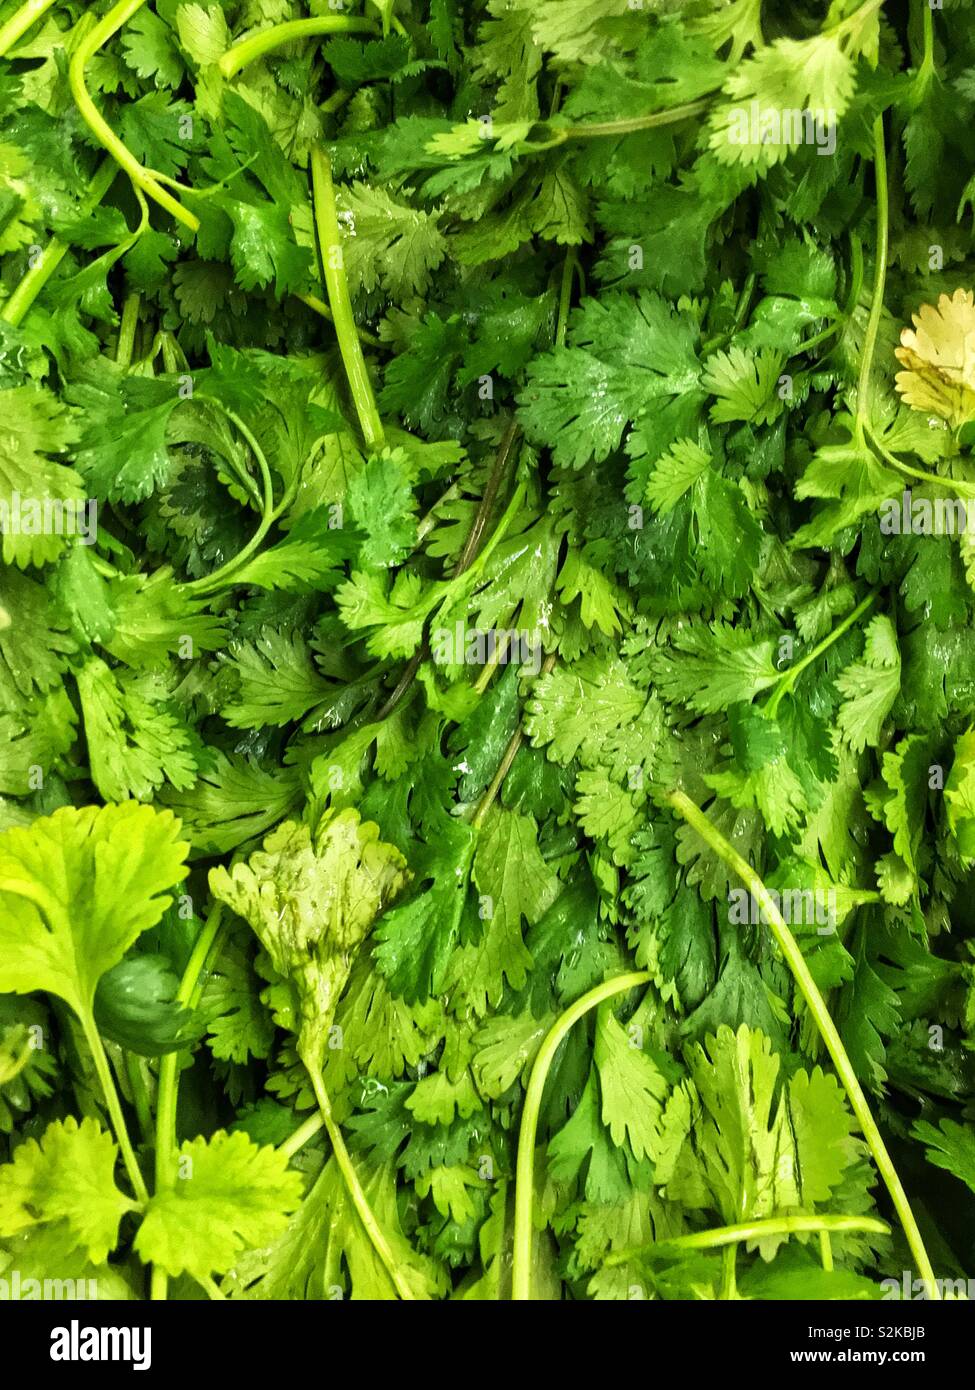 Full frame of many farm fresh ripe green cilantro leaves on display and for sale at the local produce vendor. Stock Photo